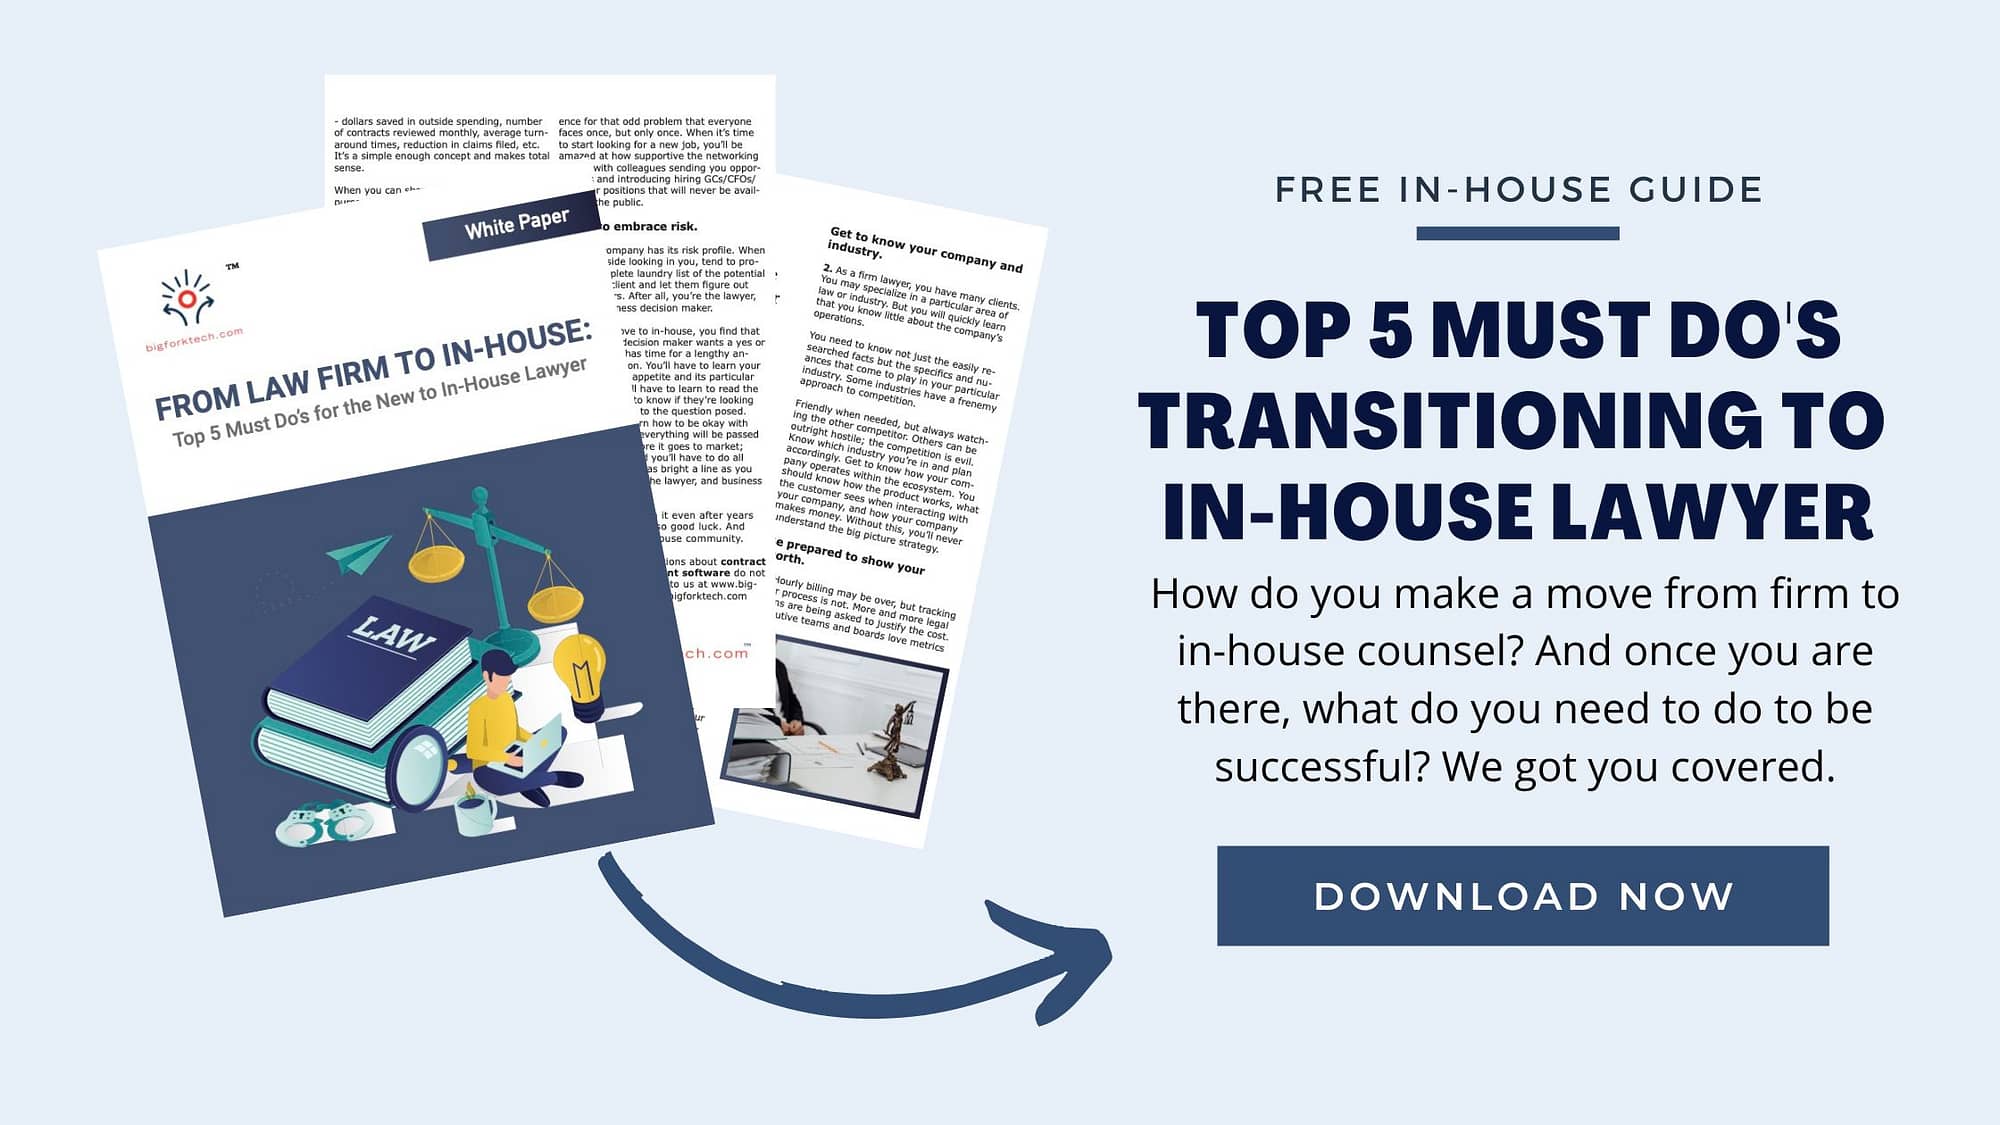 Top 5 Must Do's Transitioning to In-House Lawyer guide free download.